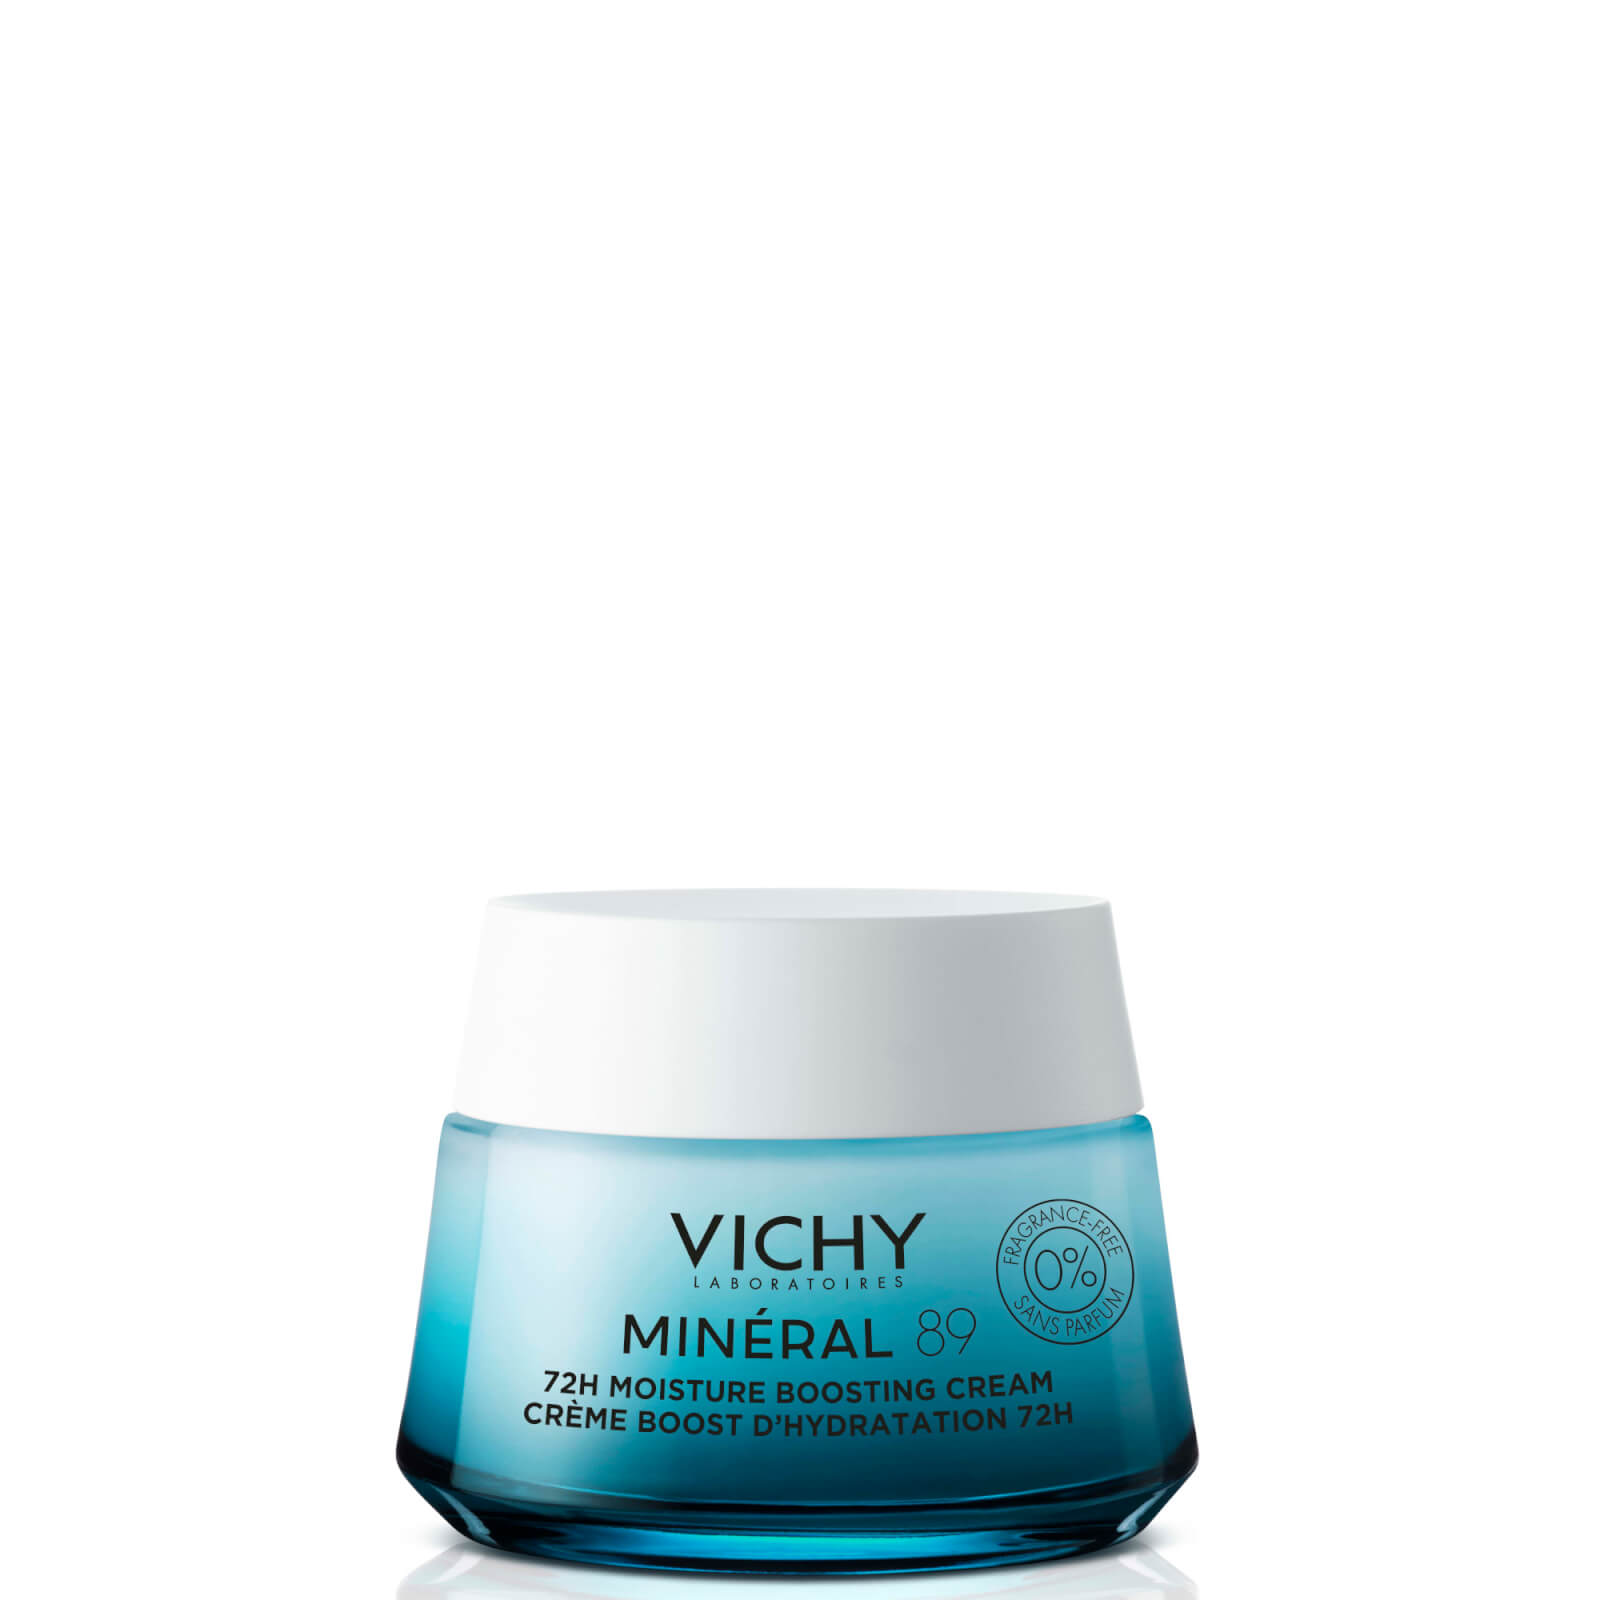 Vichy Mineral 89 Fragrance Free 72h Moisture Boosting Lightweight Cream With Hyaluronic Acid (1.69 Fl. Oz.